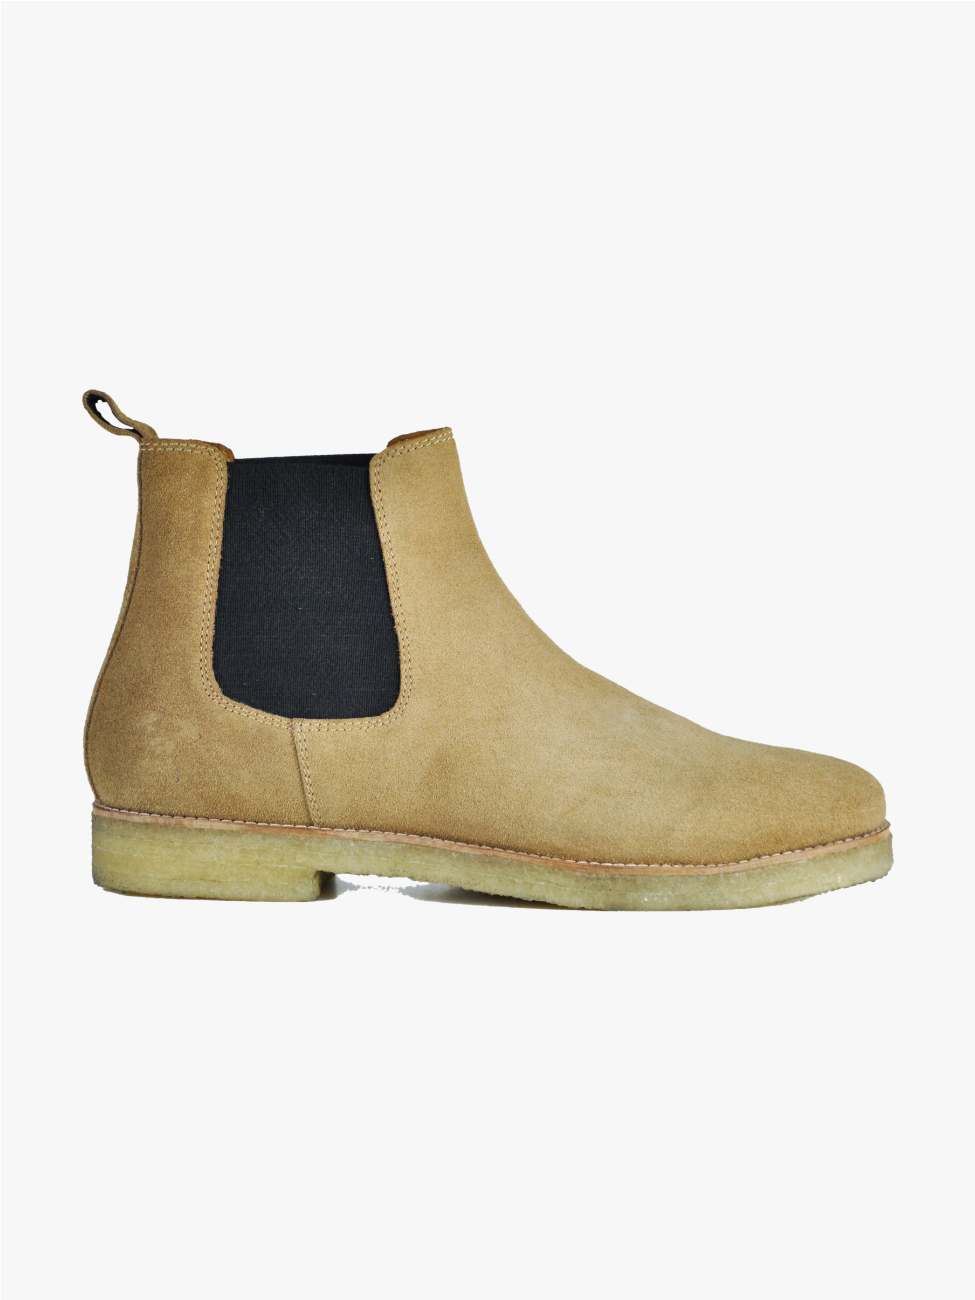 The Maddox 2 Men's Boot in Tan Suede